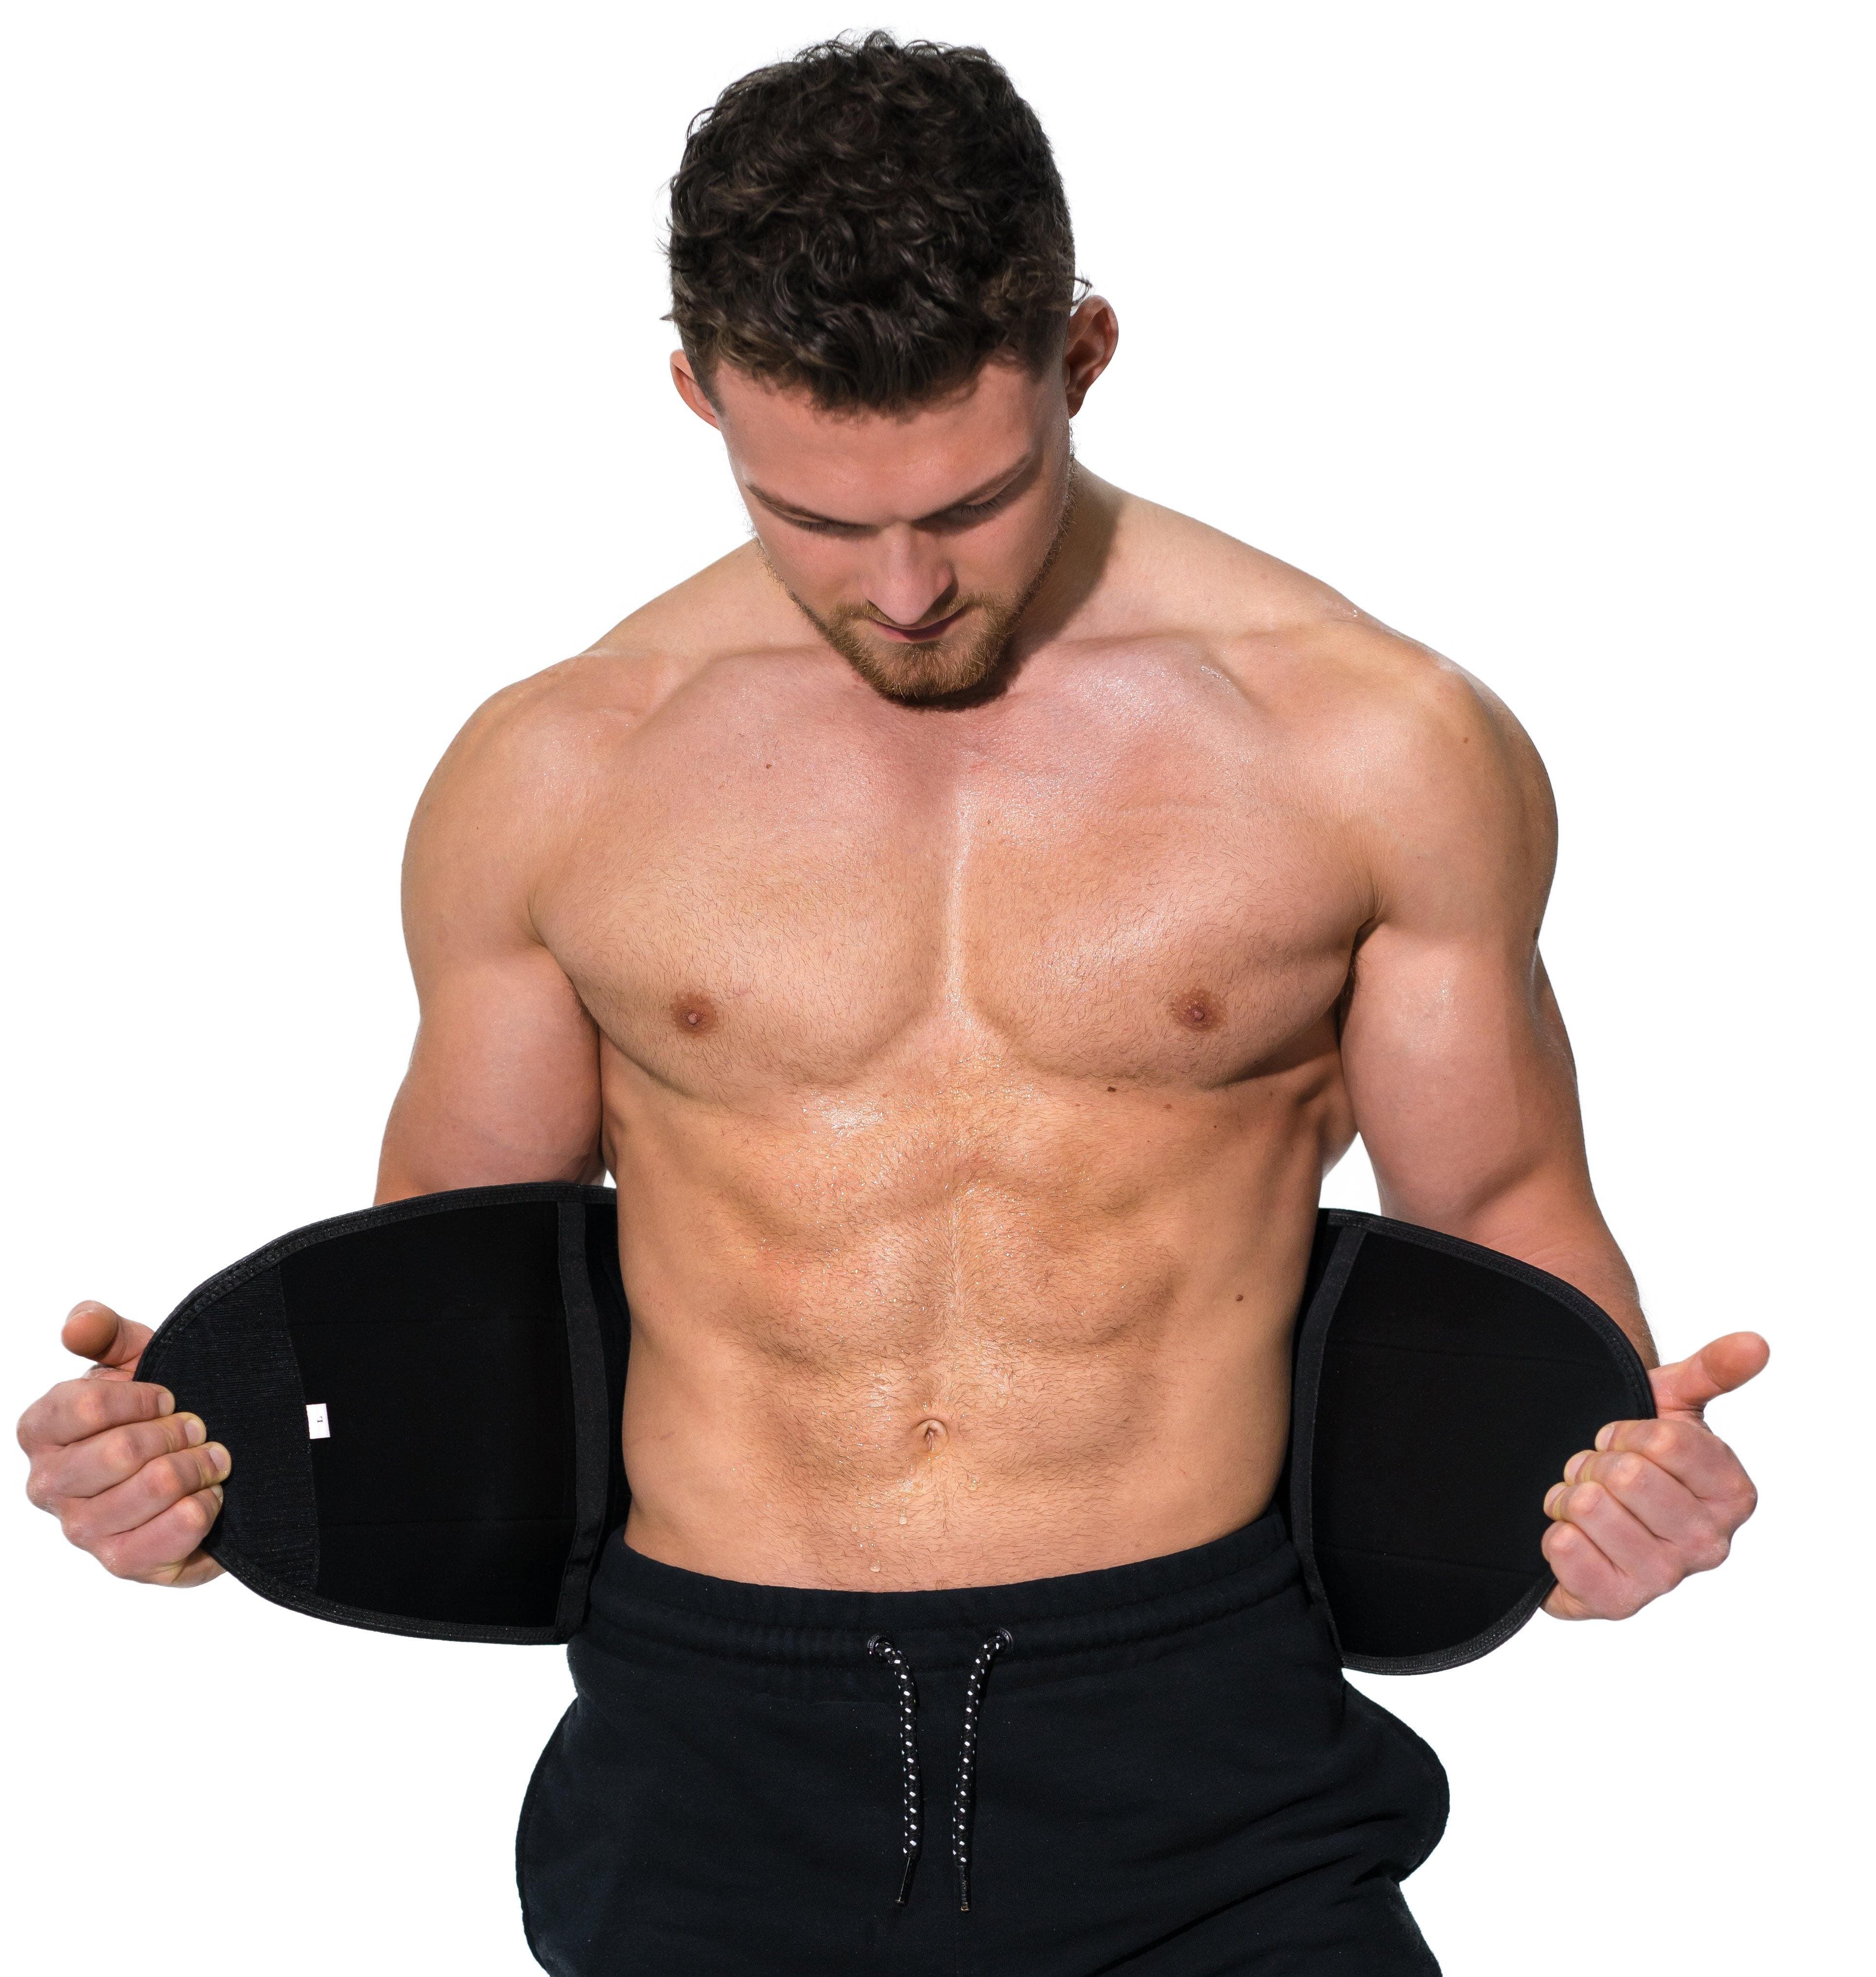 Man modeling the Redge Fit Home Gym Intermediate Pack Sweat Belt Available at https://www.getredge.com/products/home-gym-intermediate-pack